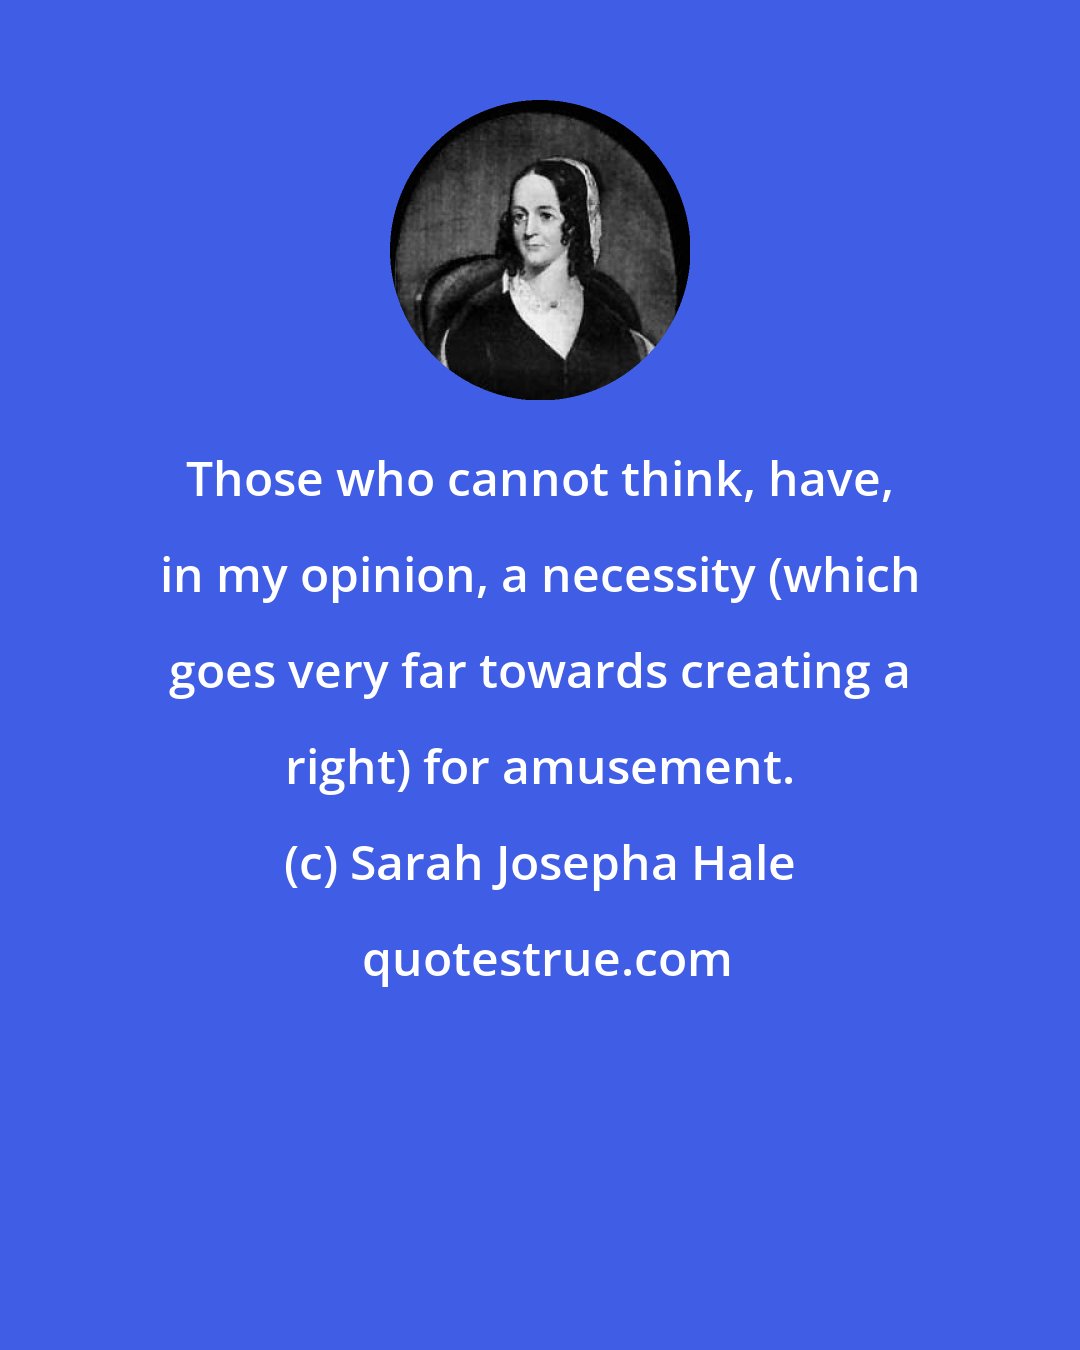 Sarah Josepha Hale: Those who cannot think, have, in my opinion, a necessity (which goes very far towards creating a right) for amusement.